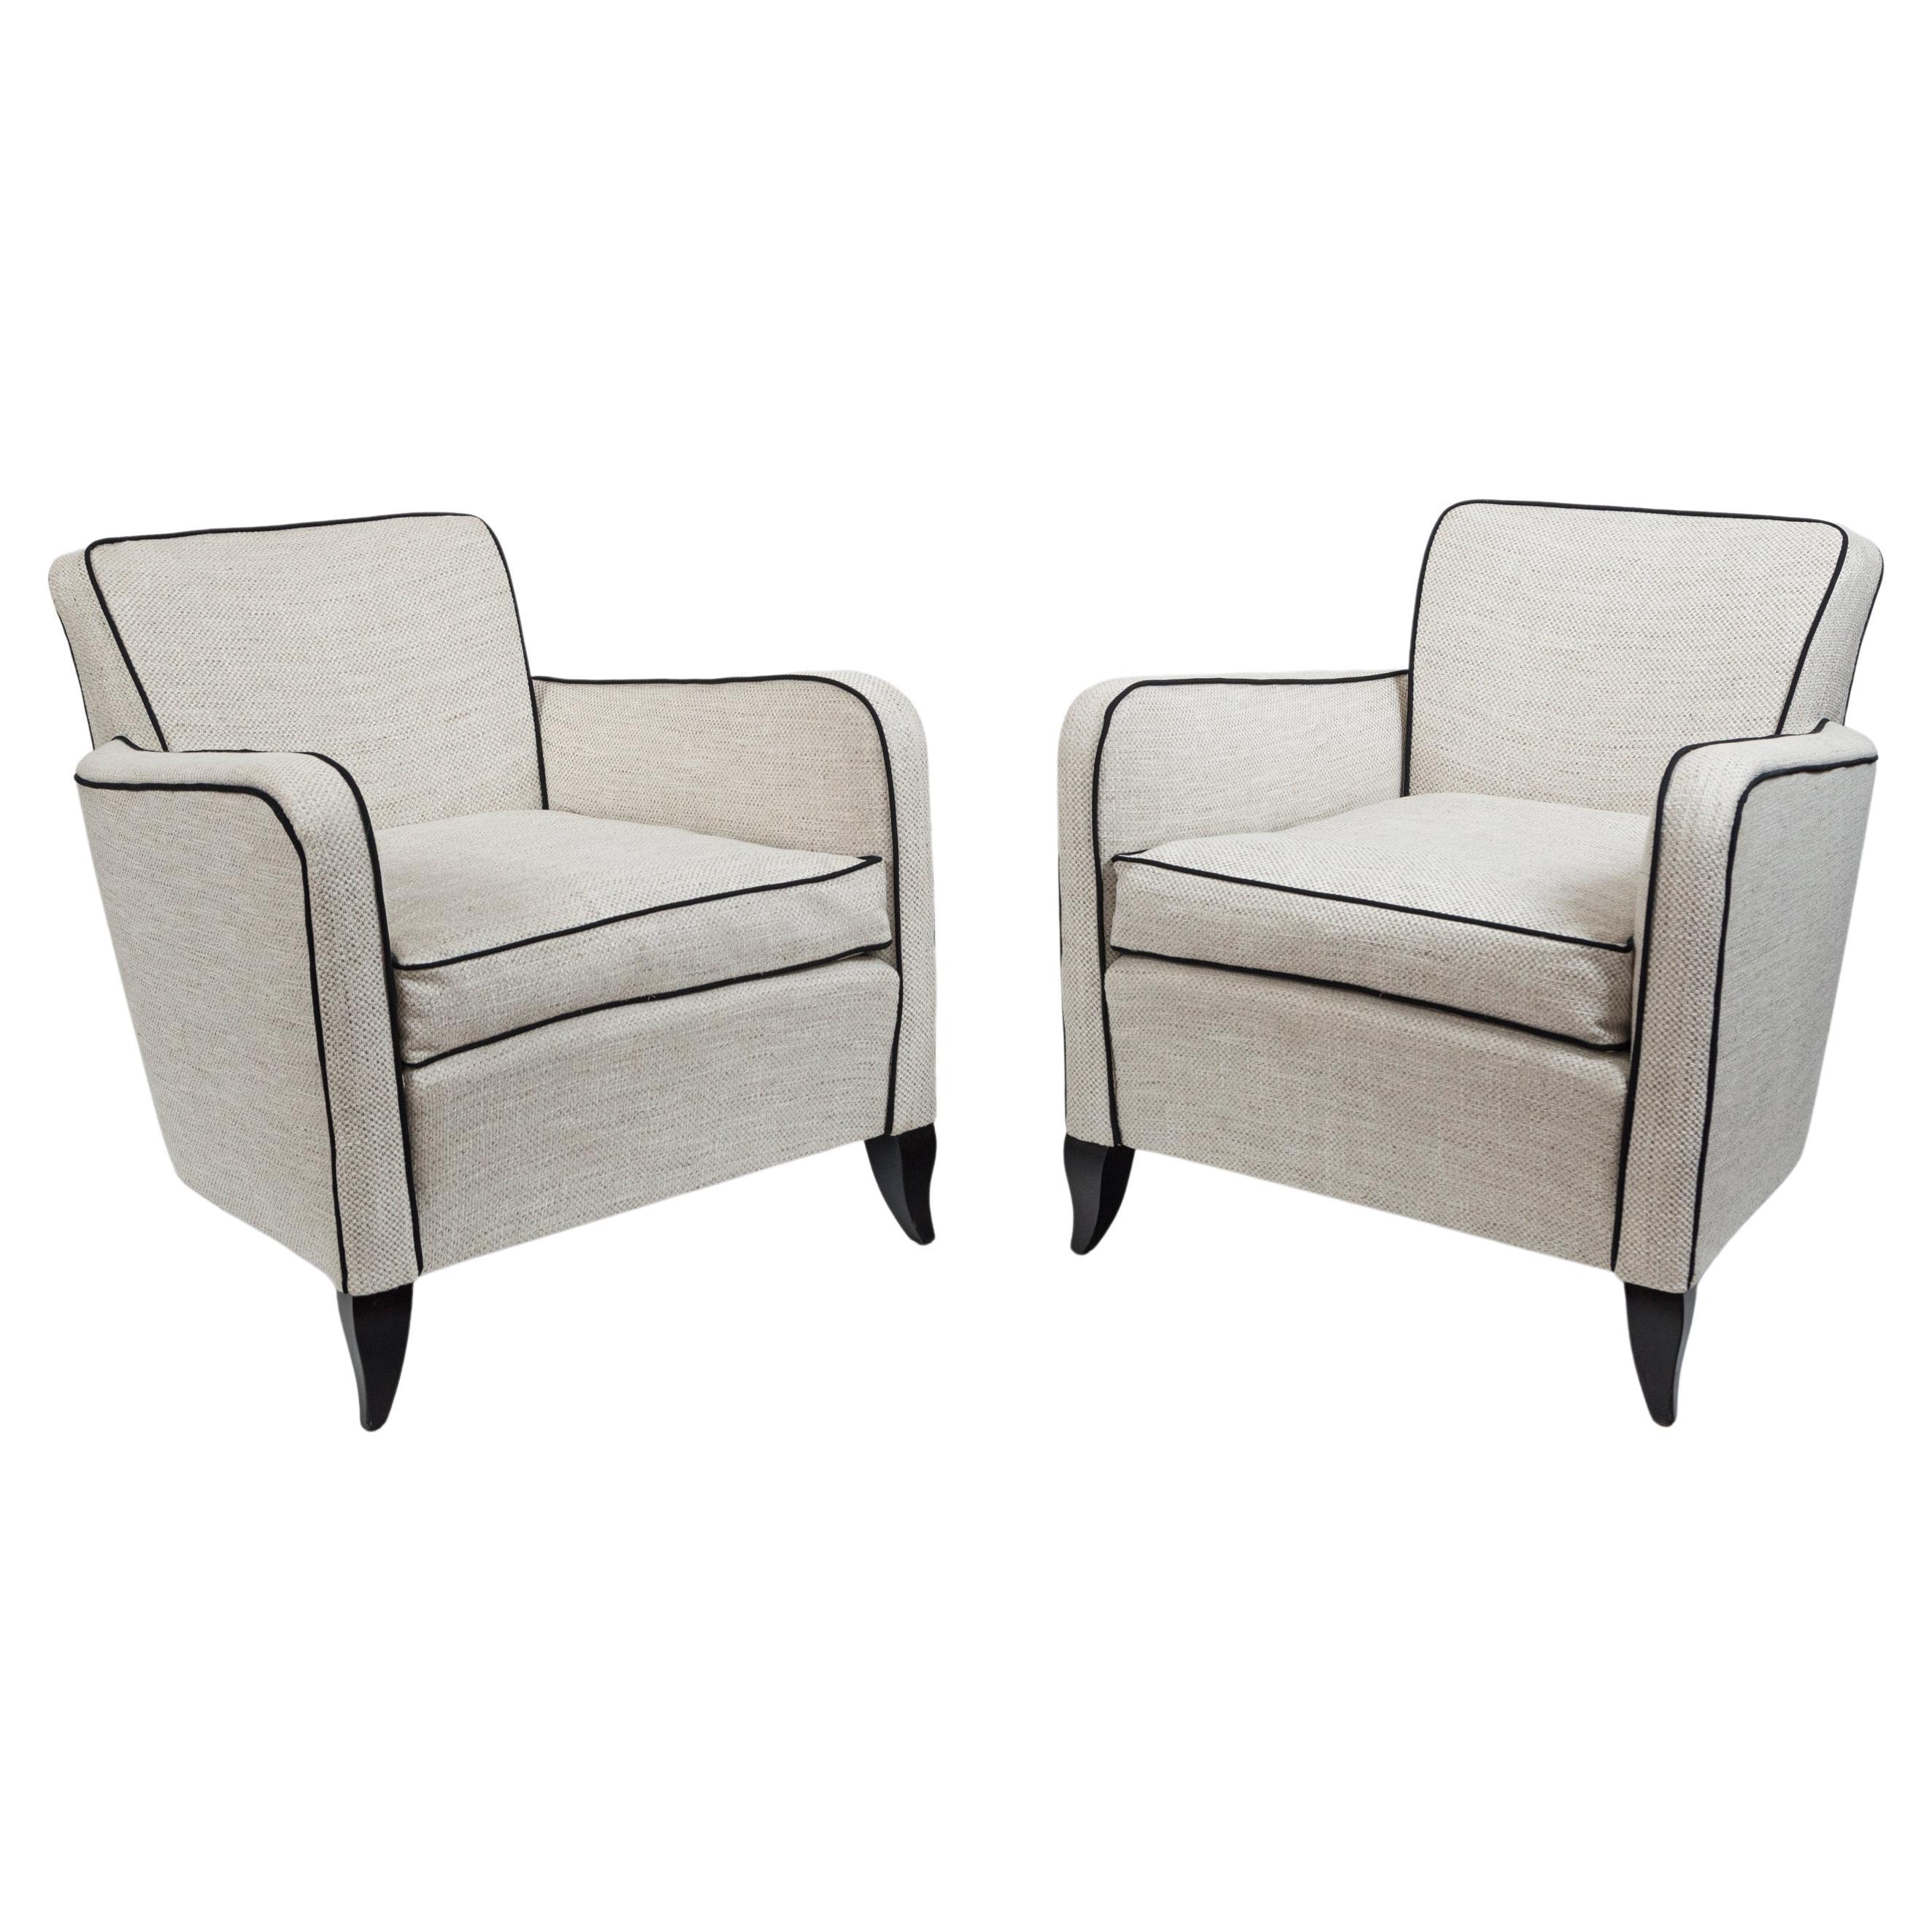 An elegant early pair of Art Deco club chairs in a slightly smaller scale shown with dark stained beech feet
Reupholstered in a thick creme cotton & chenille  linen weave with black piping
Note an extremely comfortable and supportive seat
Origin: